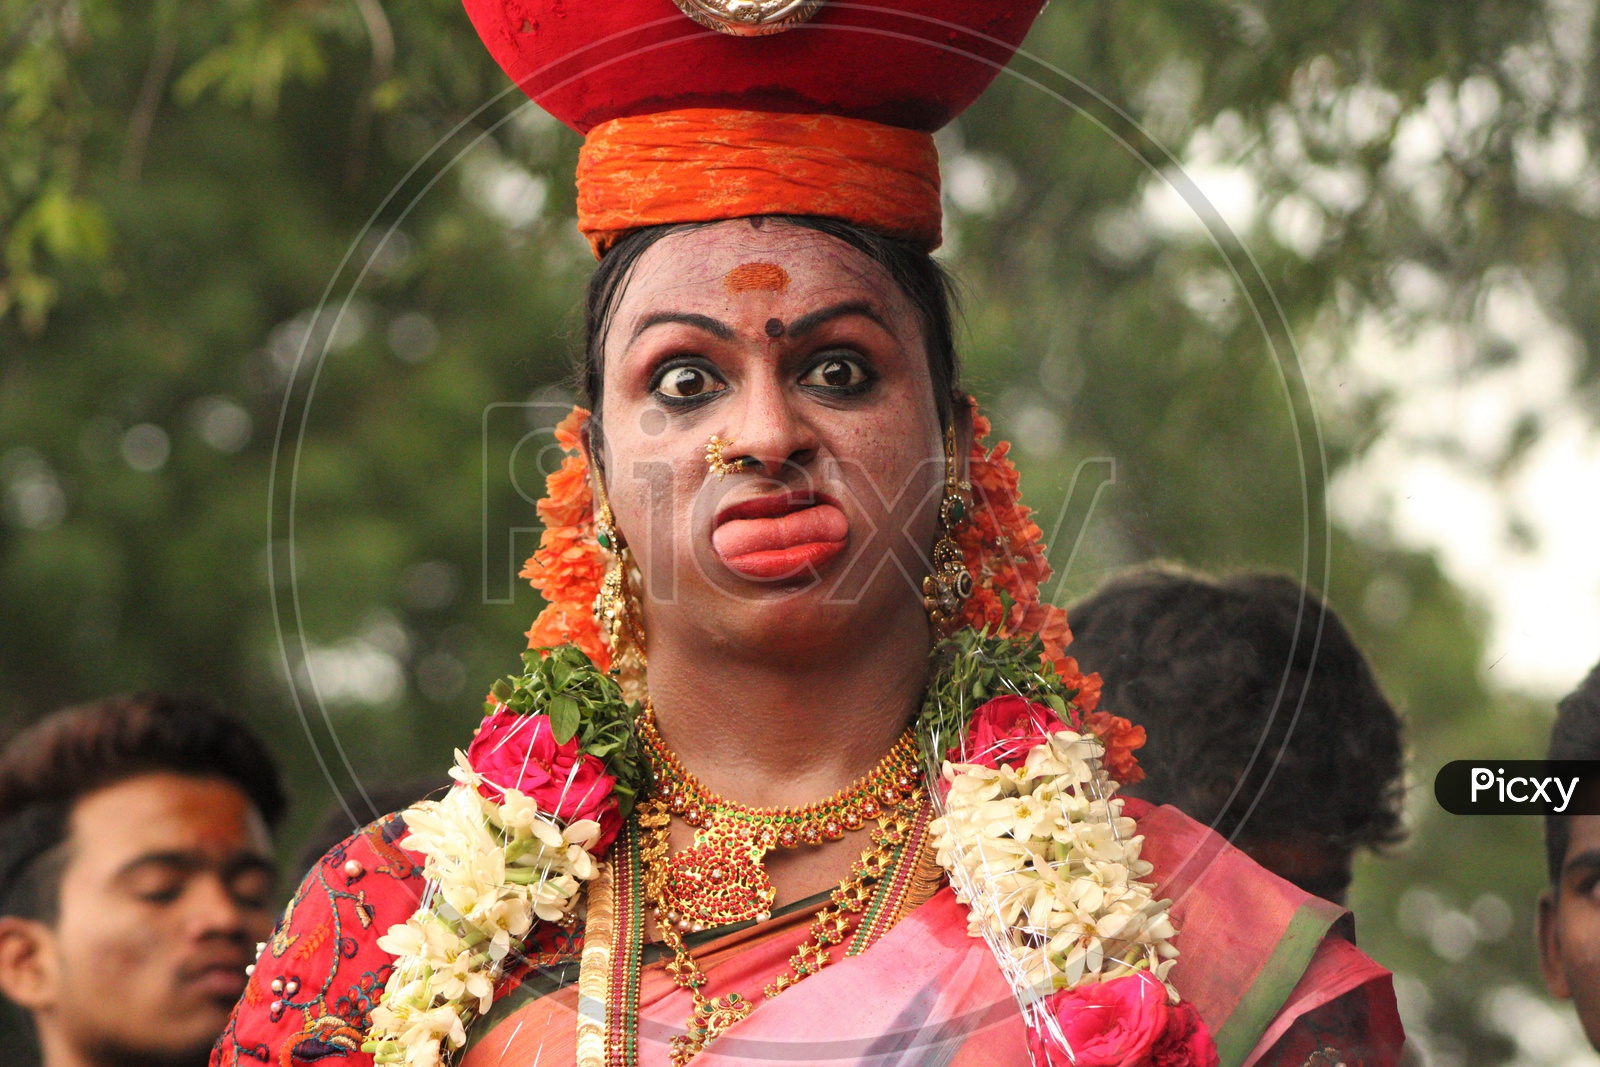 Telangana Woman Carrying Bonam On Her Head And With an Expression on Face